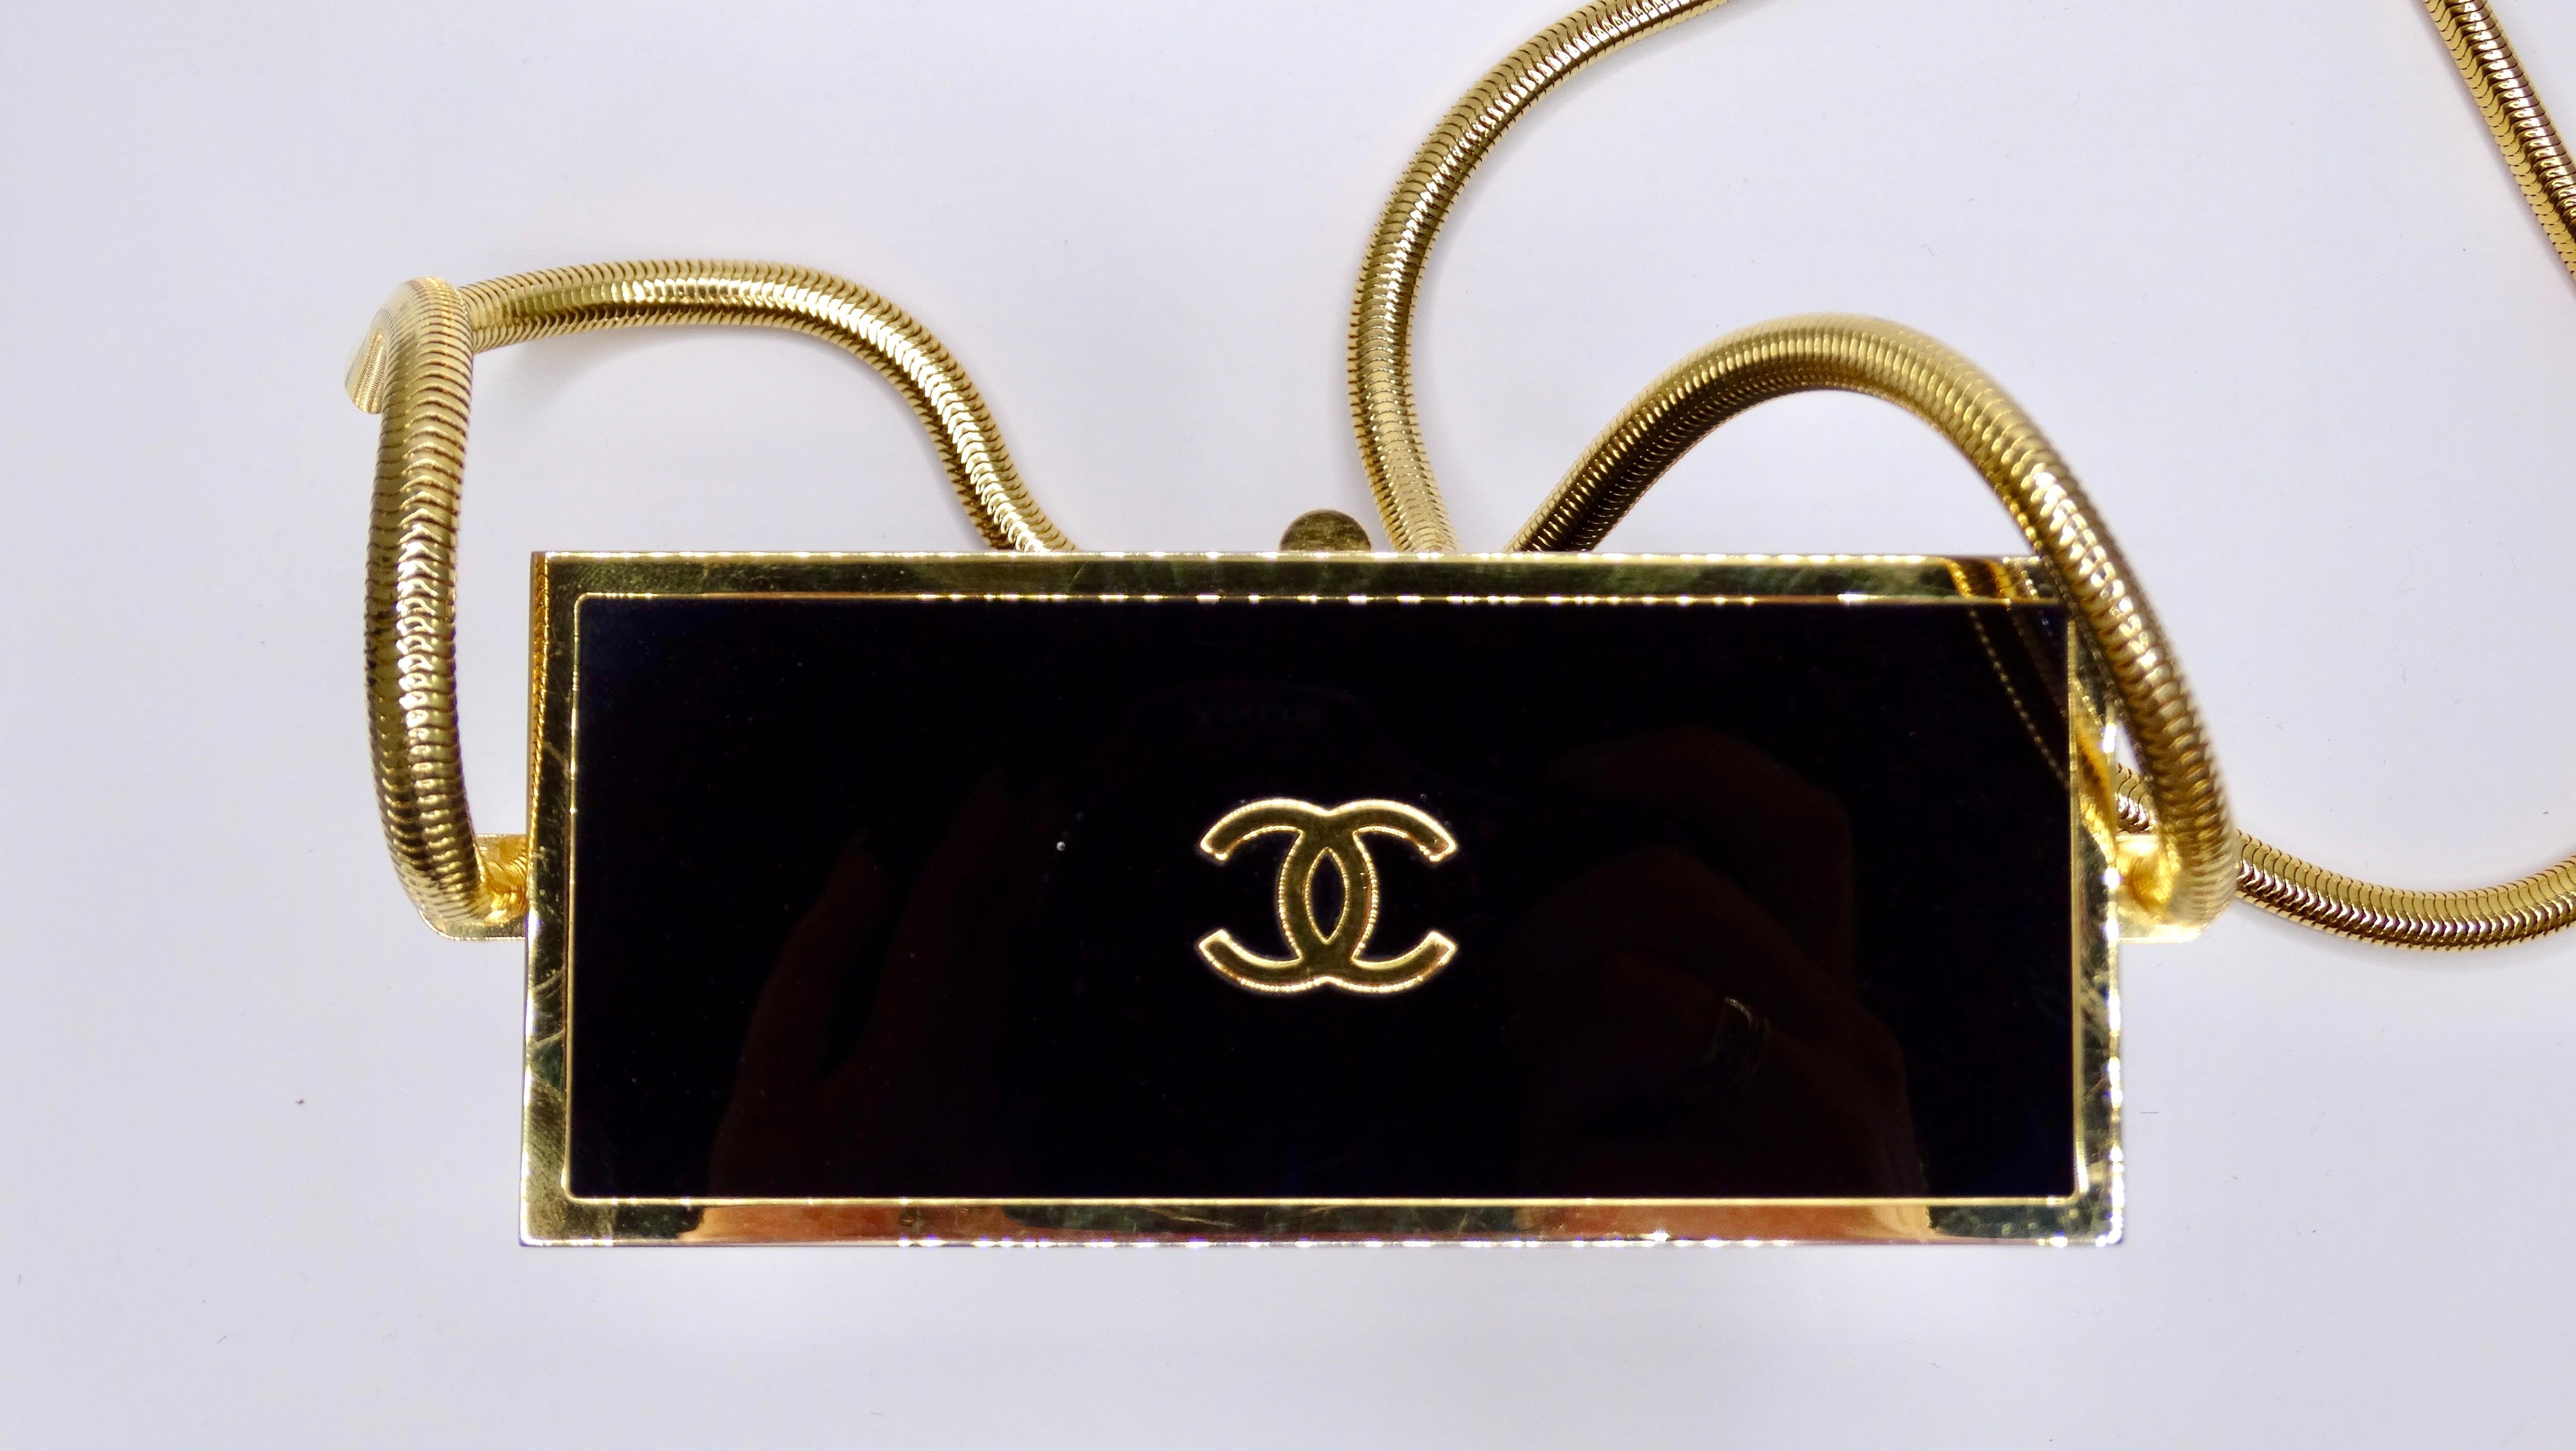 Chanel Spring 1997 Micro Mini Minaudière In Excellent Condition For Sale In Scottsdale, AZ